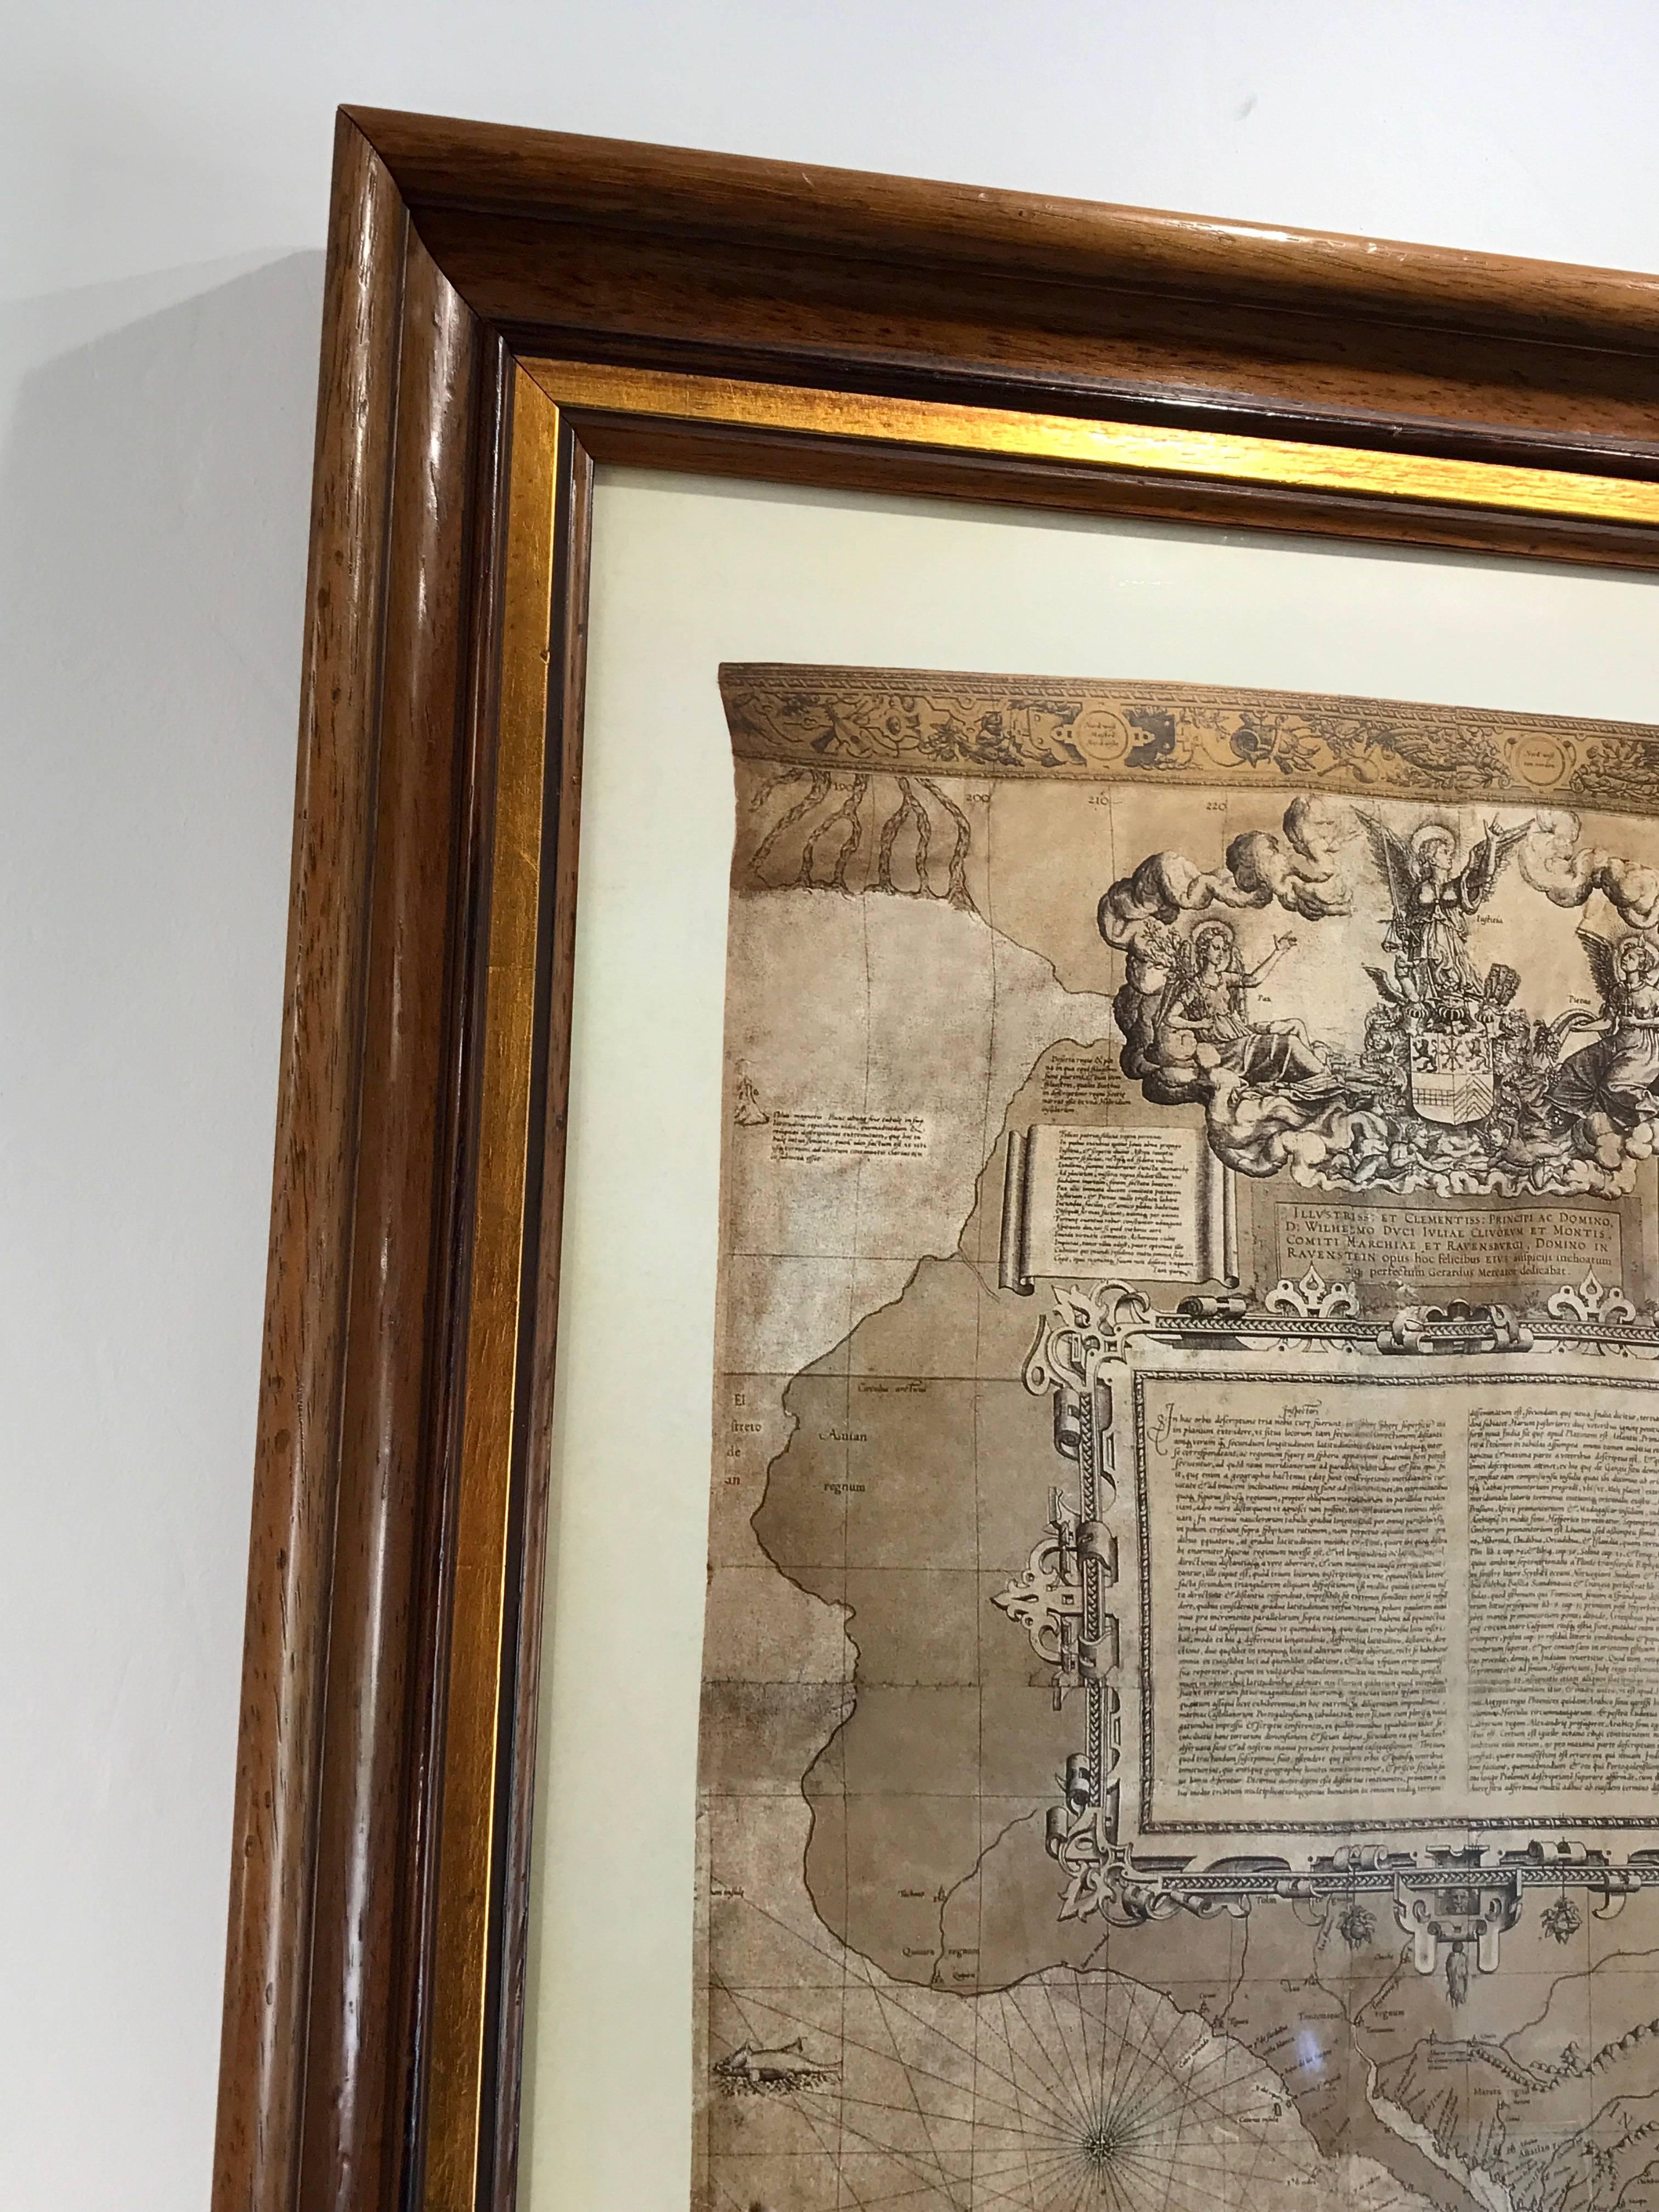 Large-scale map of the world after Mercator, 1569, 20th century printing, in 2.5 deep walnut and gilt frame.
This item is at our Atlanta GA, Location, not Palm Beach.
